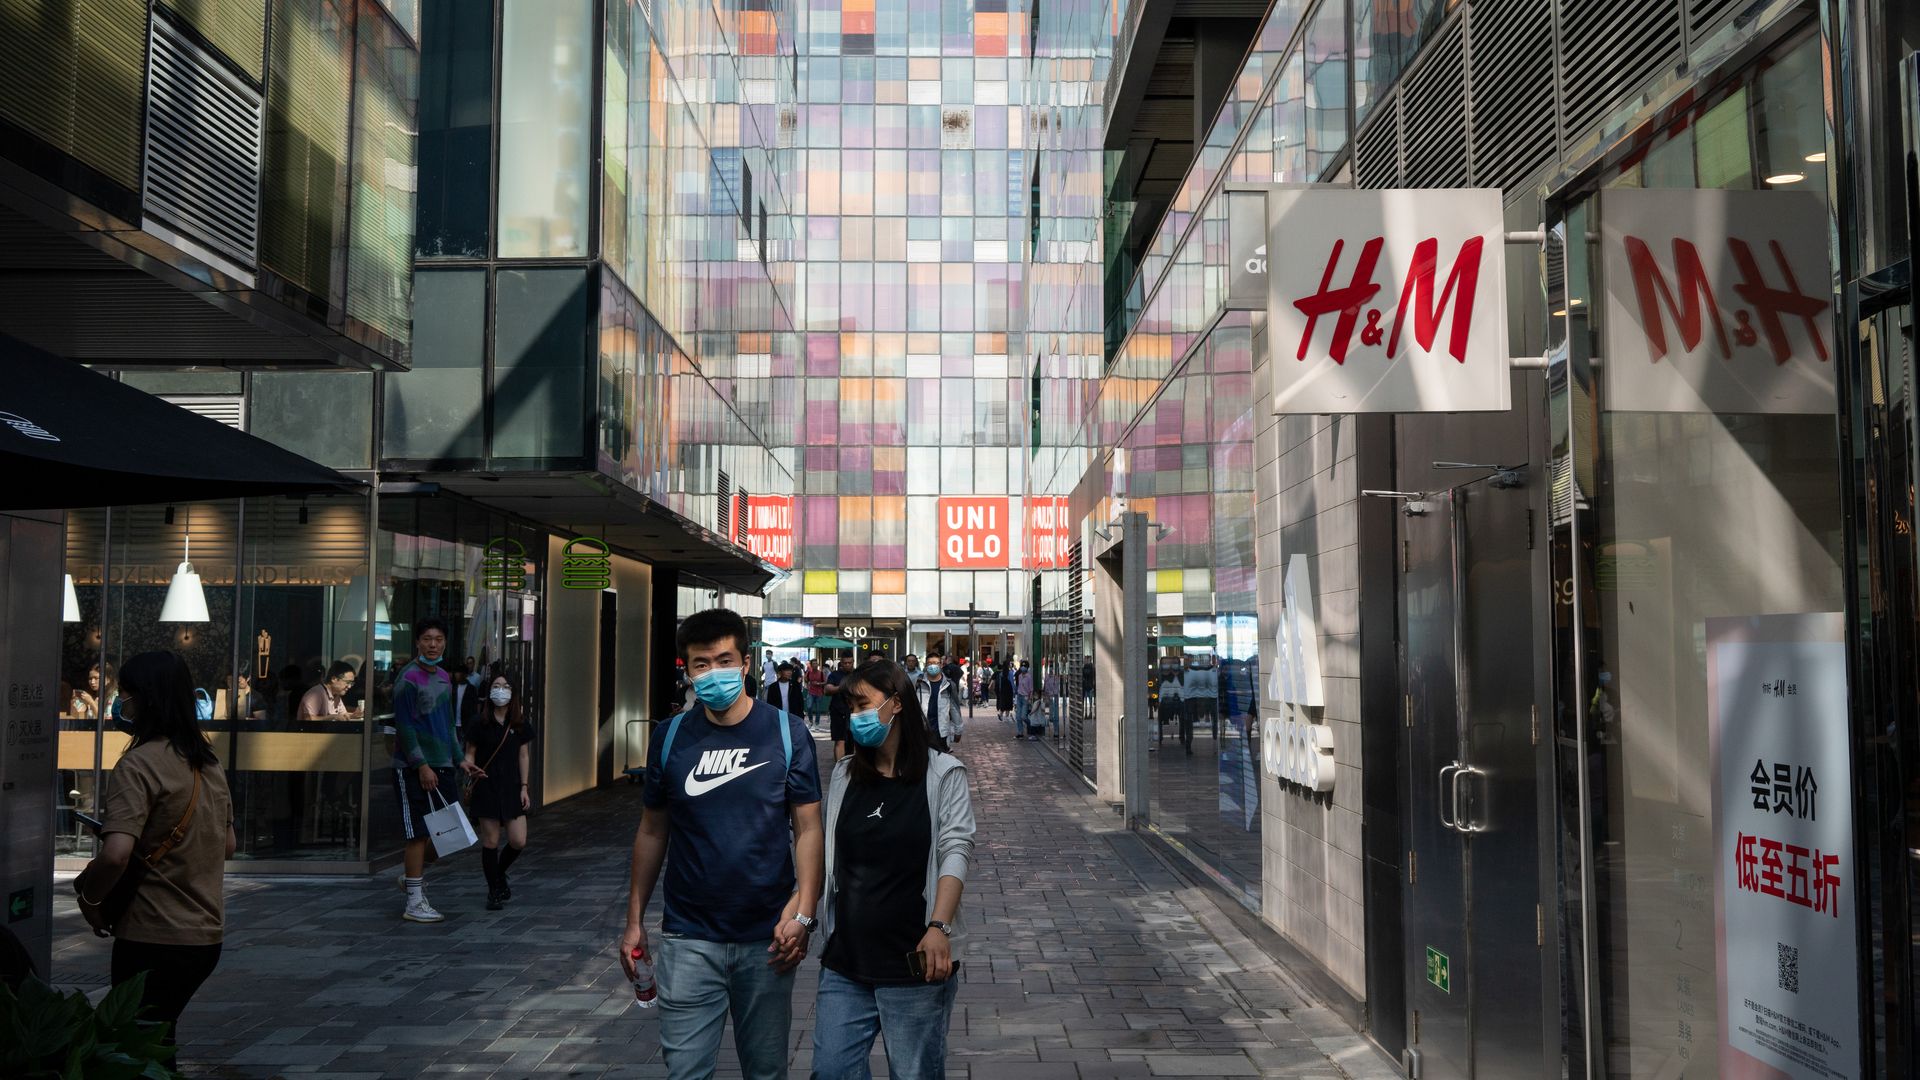 People wearing protective masks walk past a Hennes & Mauritz AB (H&M) store and a Uniqlo store, operated by Fast Retailing Co., at a shopping area in Beijing, China on Sunday, Sept. 20